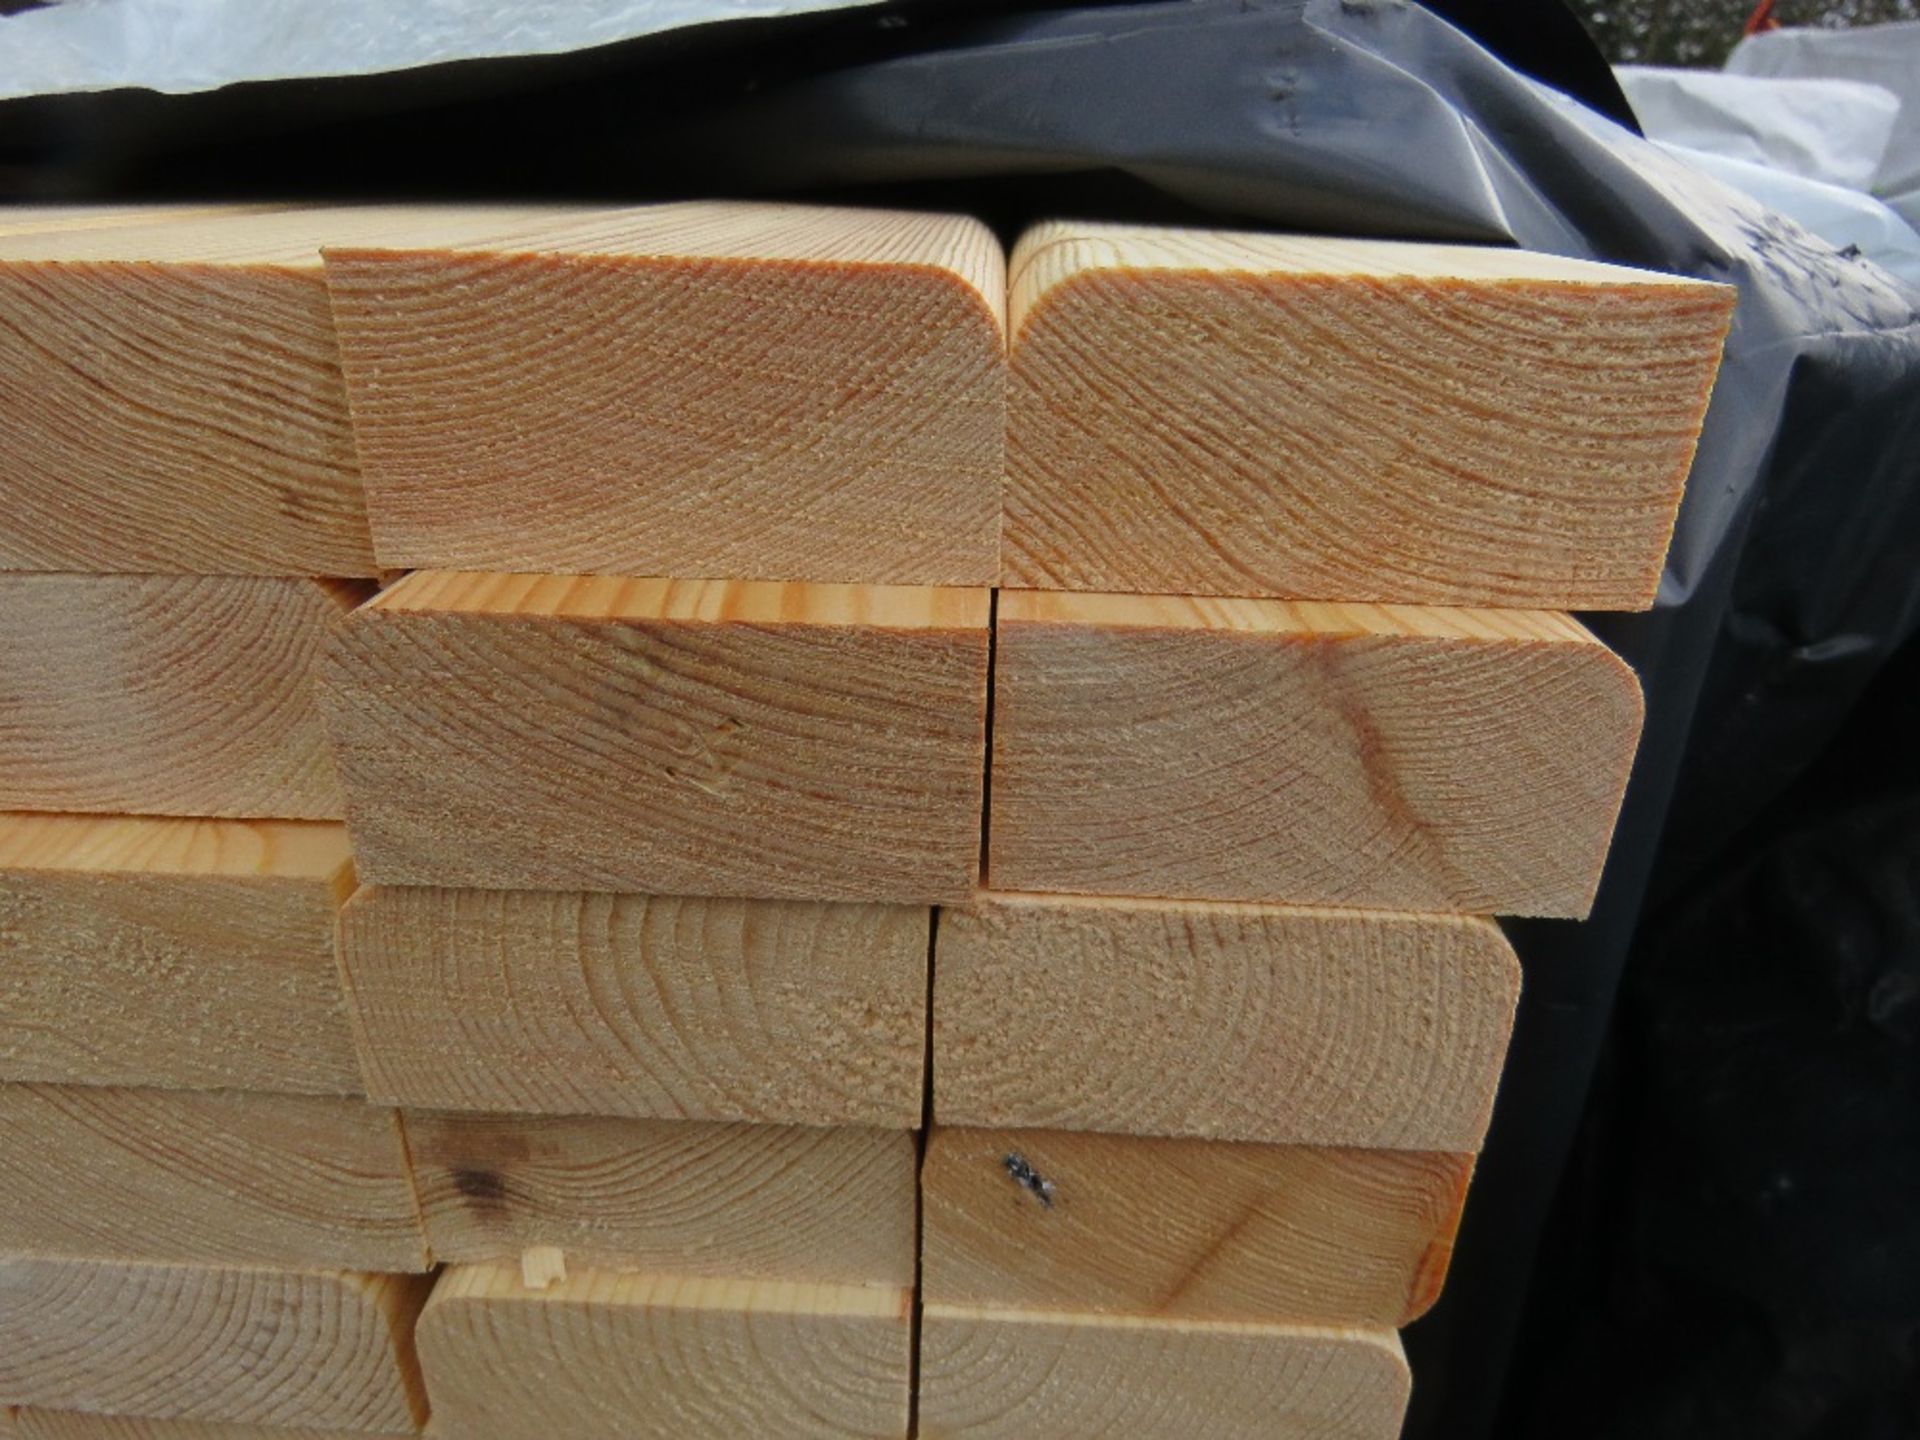 PACK OF UNTRETAED TIMBER BATTENS 2.4M LENGTH X 70MM X 35MM APPROX. - Image 3 of 3